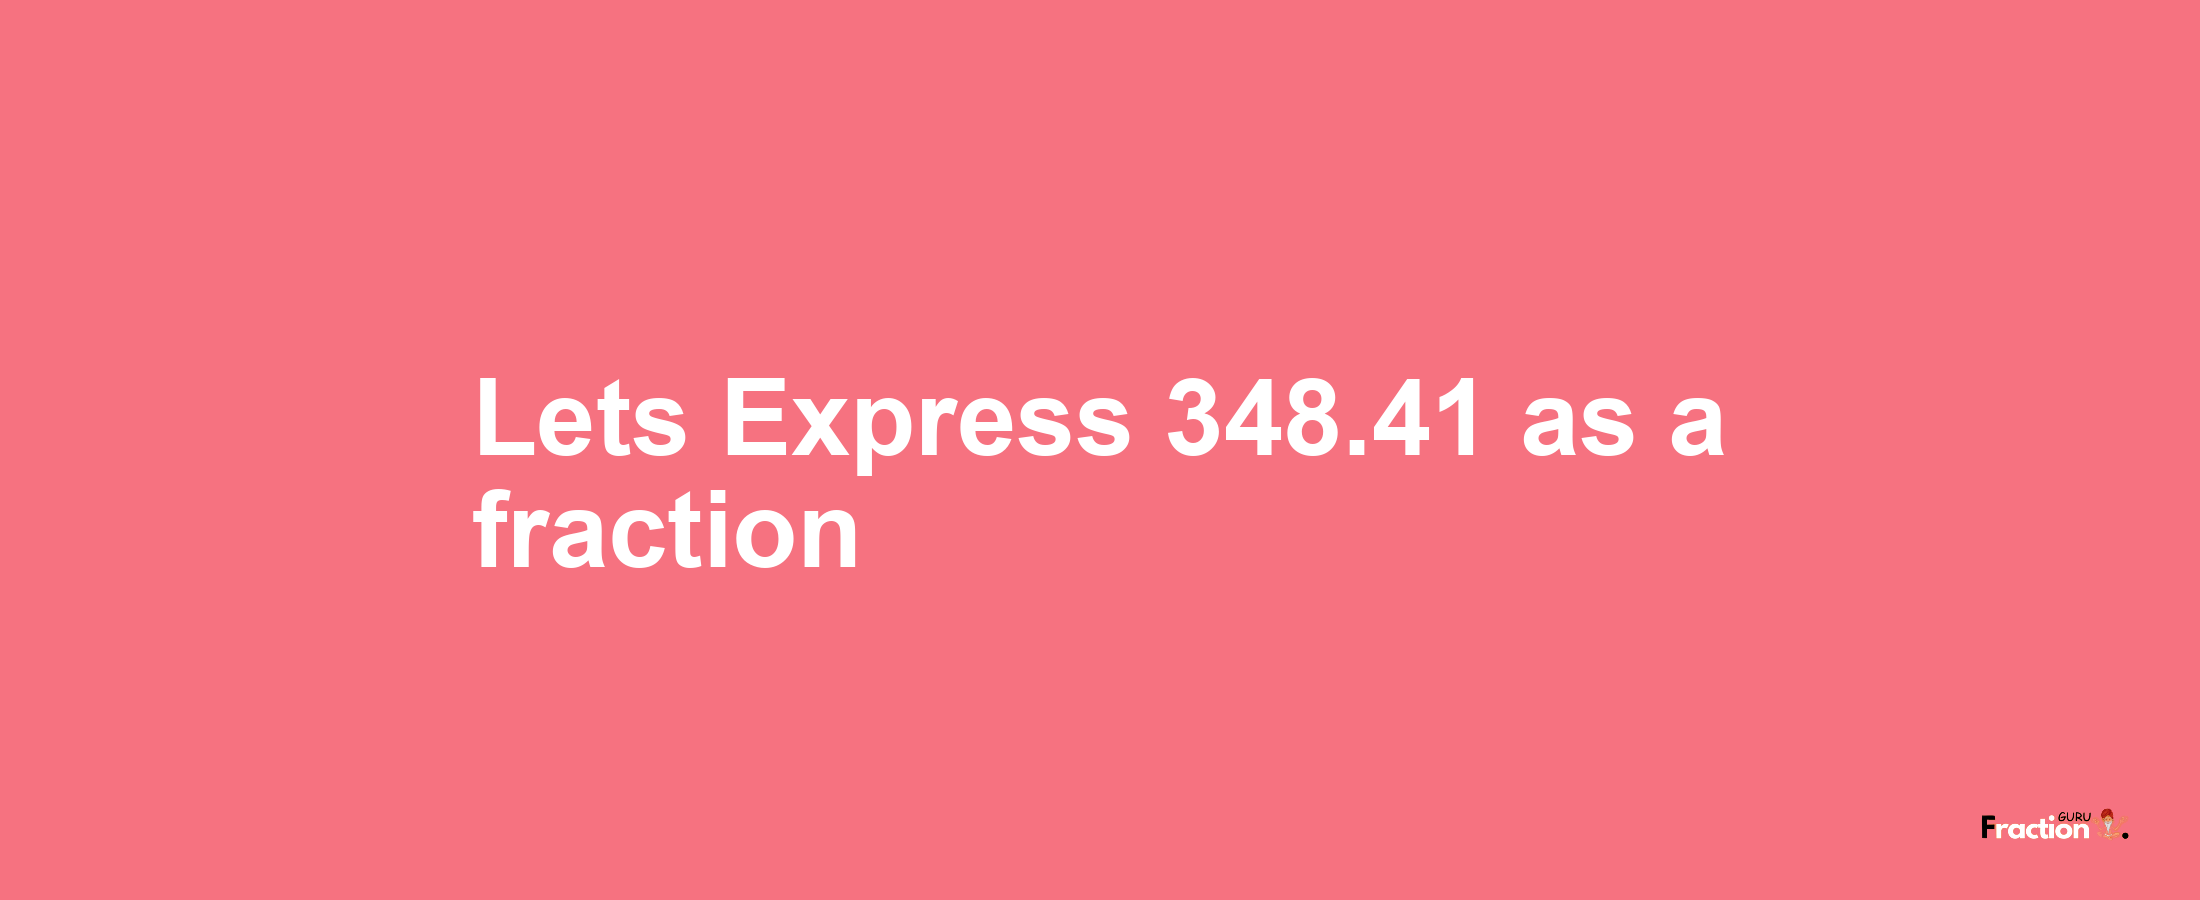 Lets Express 348.41 as afraction